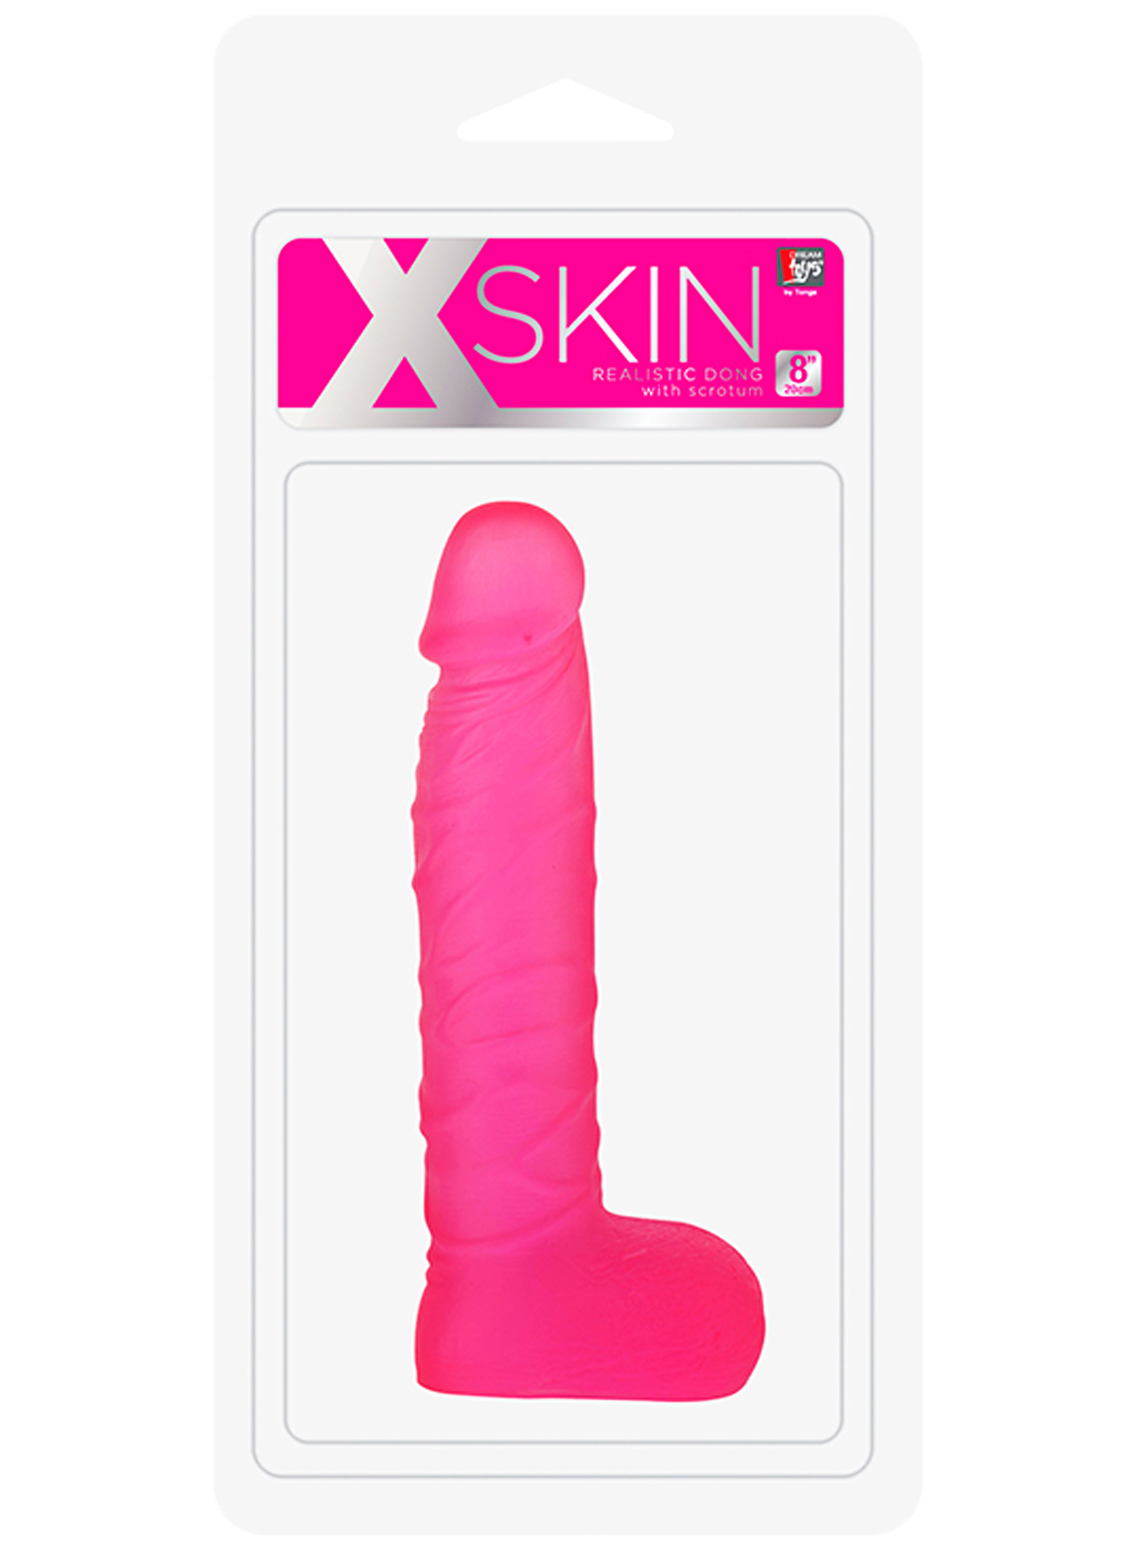 Dream Toys XSkin 8" Realistic Dong